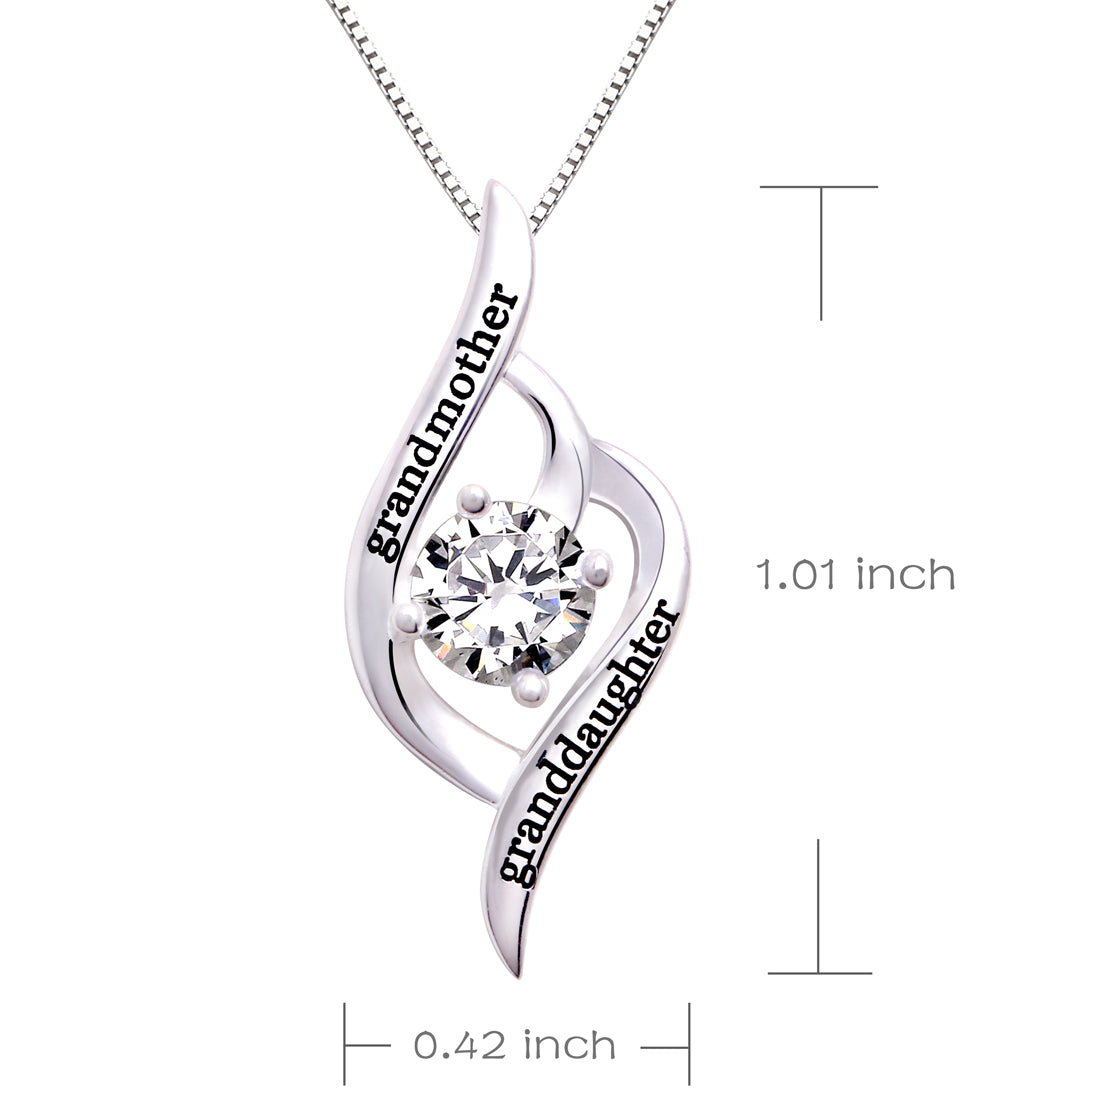 ALOV Jewelry Sterling Silver "grandmother granddaughter" Love Cubic Zirconia Pendant Necklace